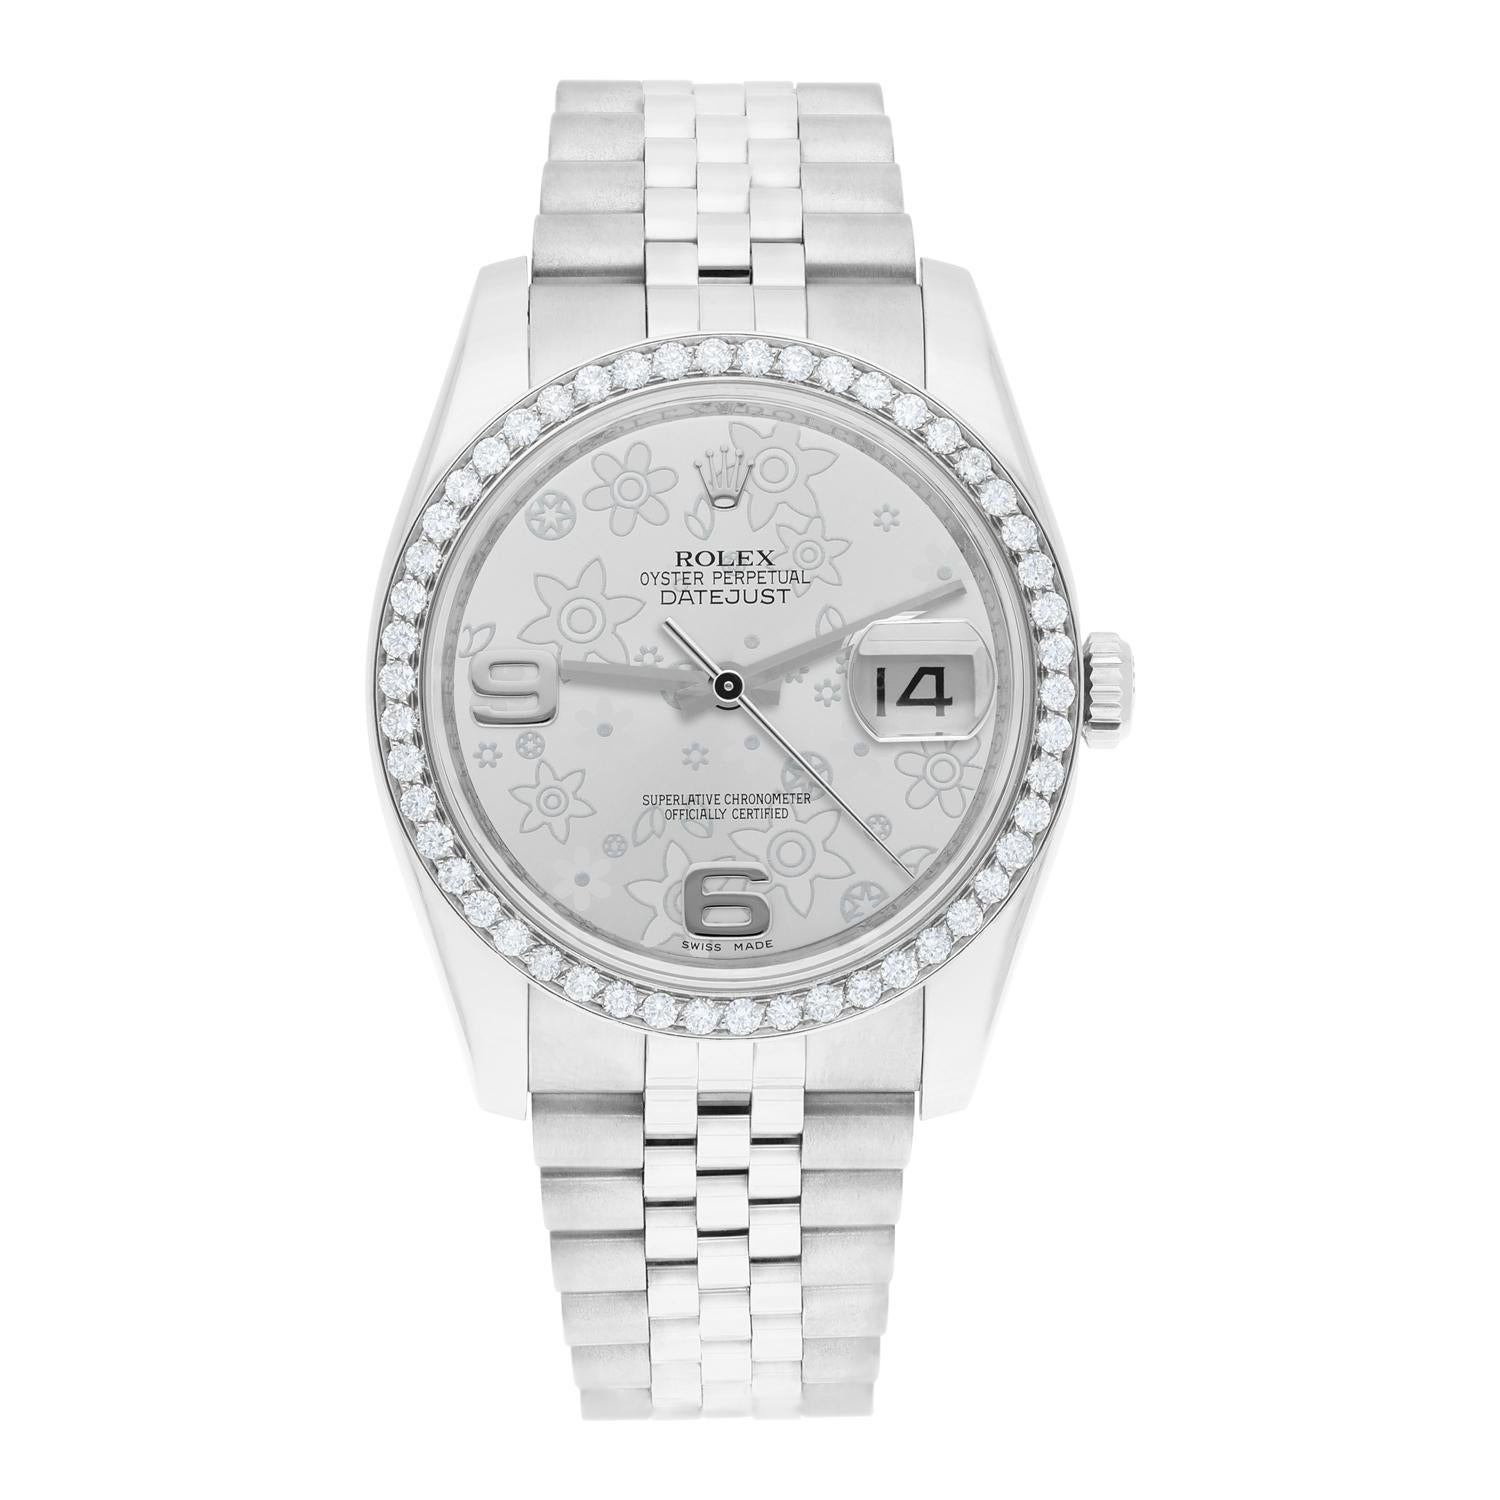 Brand: Rolex
Series: Datejust 
Model: 116234
Case Diameter: 36 mm
Bracelet: Jubilee band; stainless steel
Bezel: Custom Diamond Set
Dial: Silver Flower
Carat Weight: 1.32 carats in total diamond weight
The sale includes a Rolex box and an appraisal